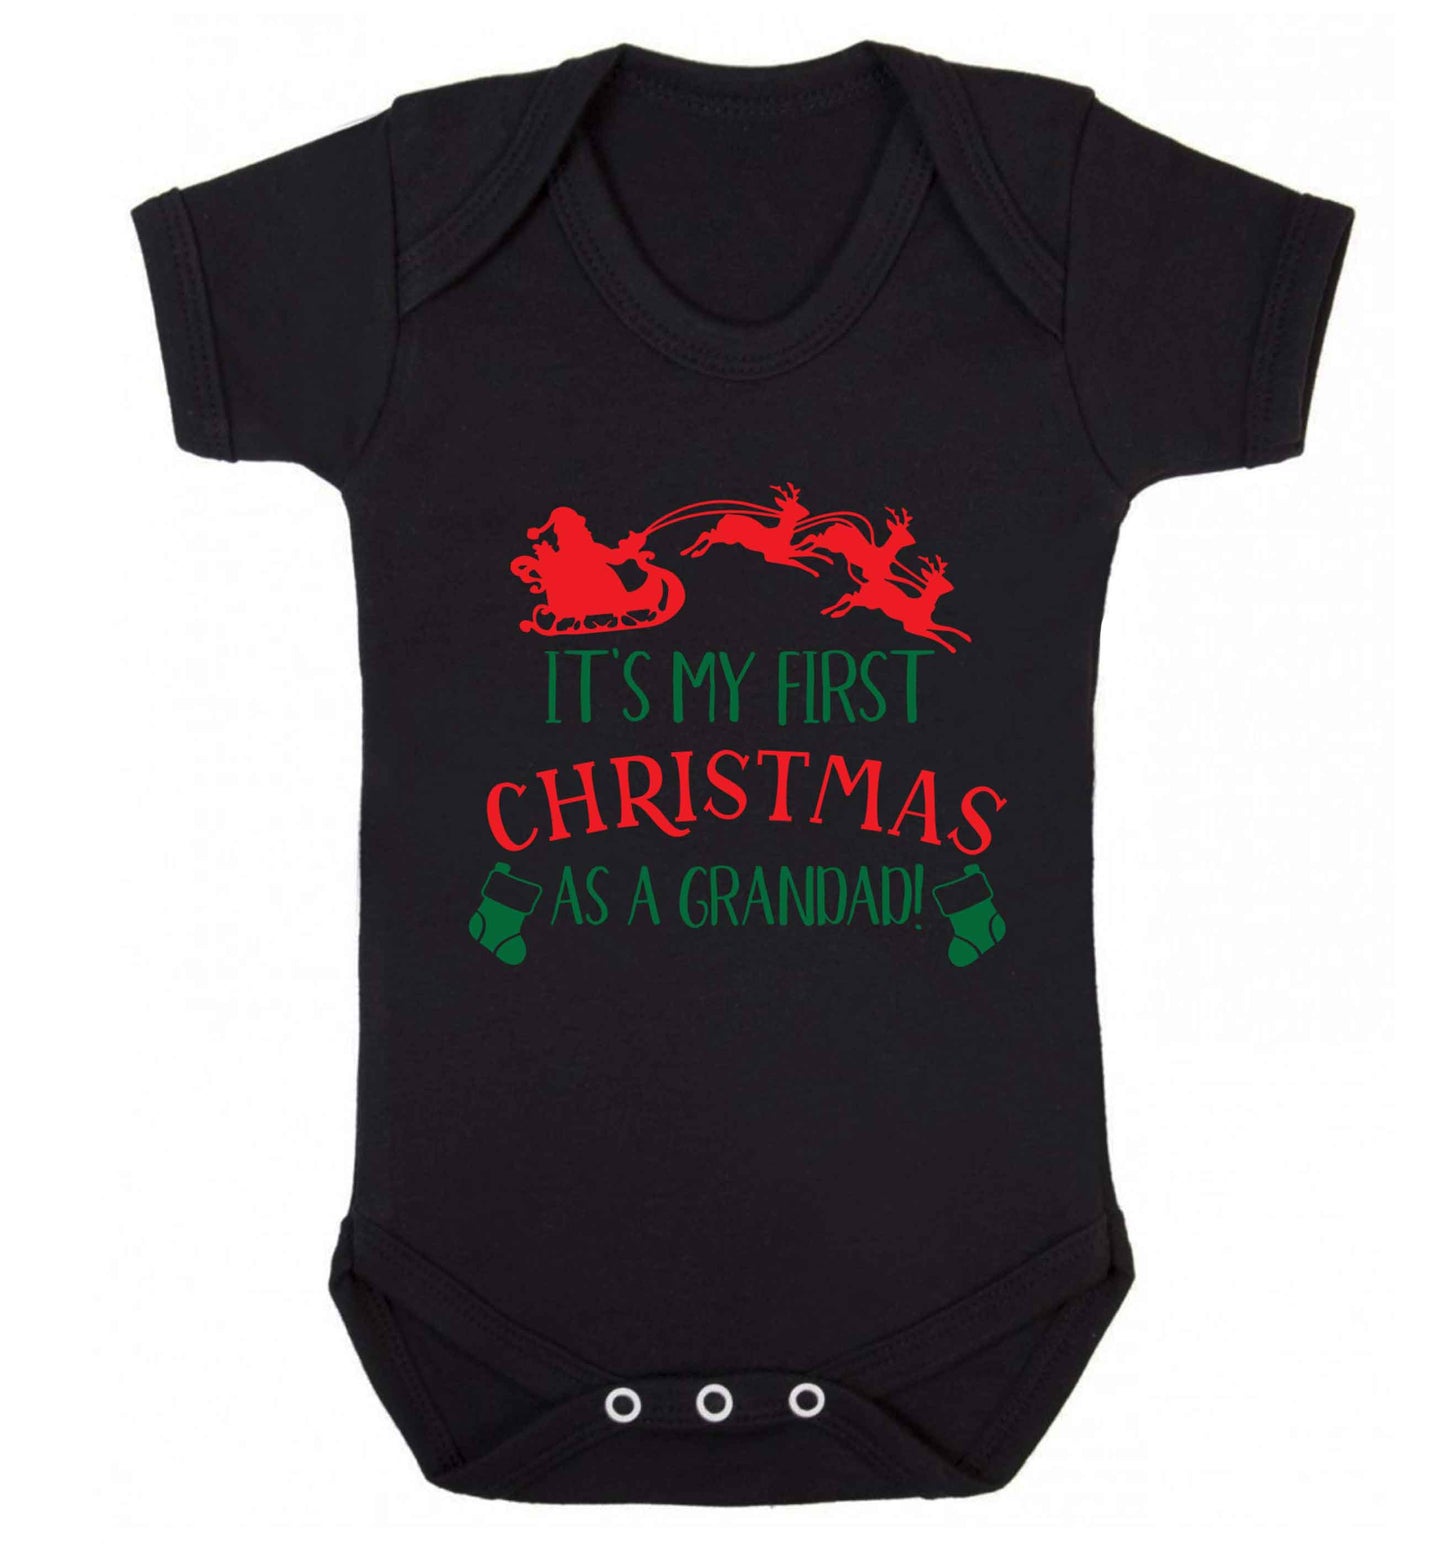 It's my first Christmas as a grandad! Baby Vest black 18-24 months